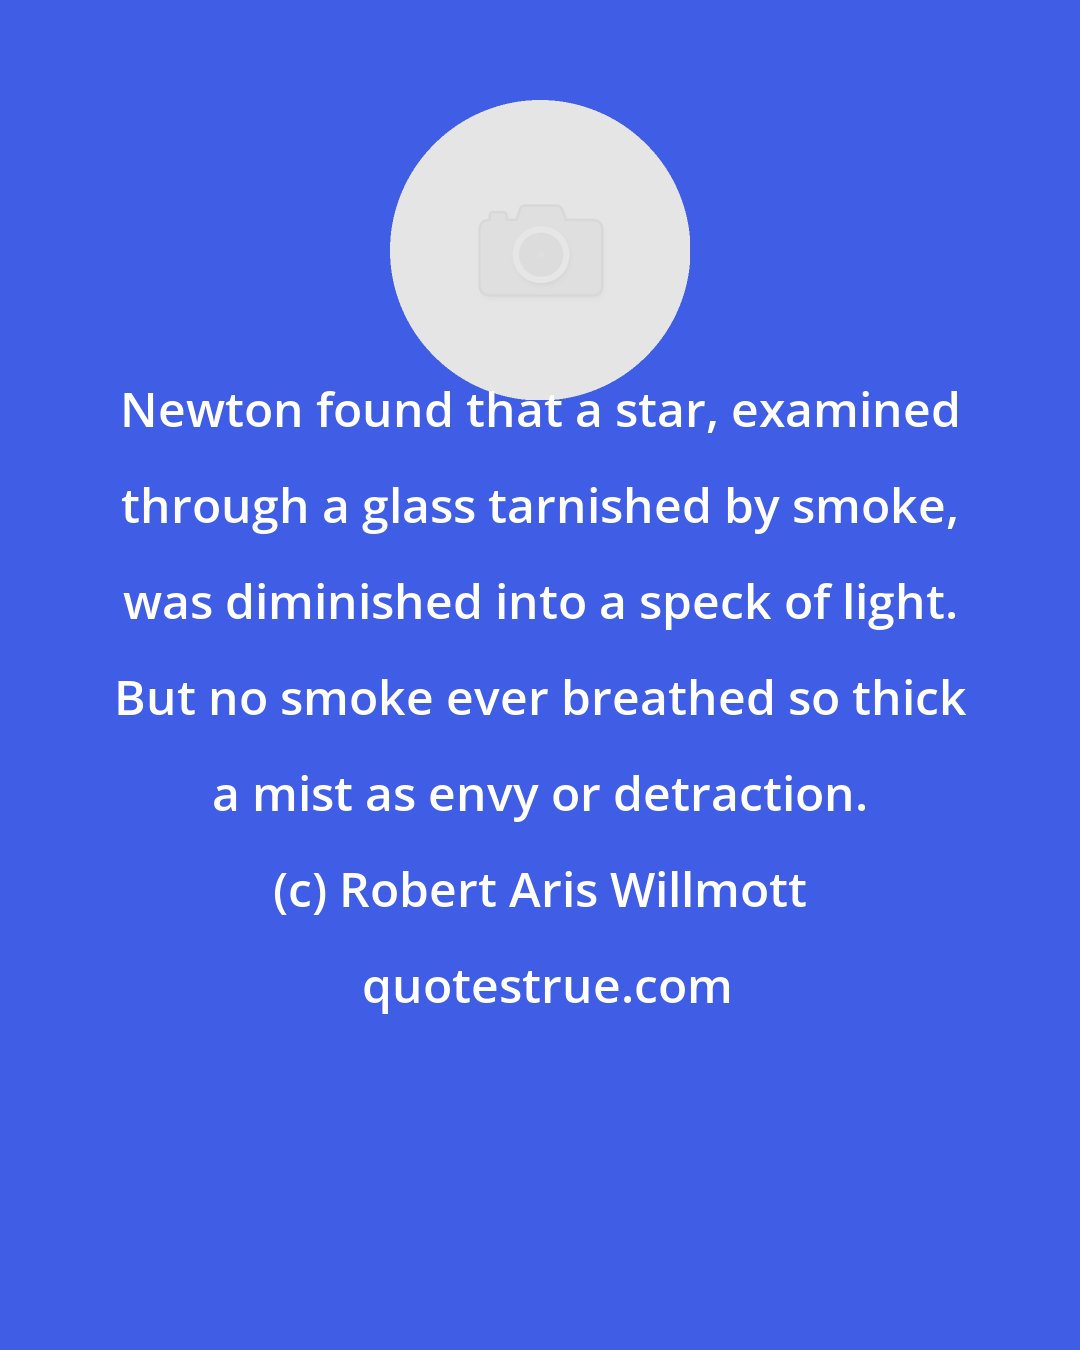 Robert Aris Willmott: Newton found that a star, examined through a glass tarnished by smoke, was diminished into a speck of light. But no smoke ever breathed so thick a mist as envy or detraction.